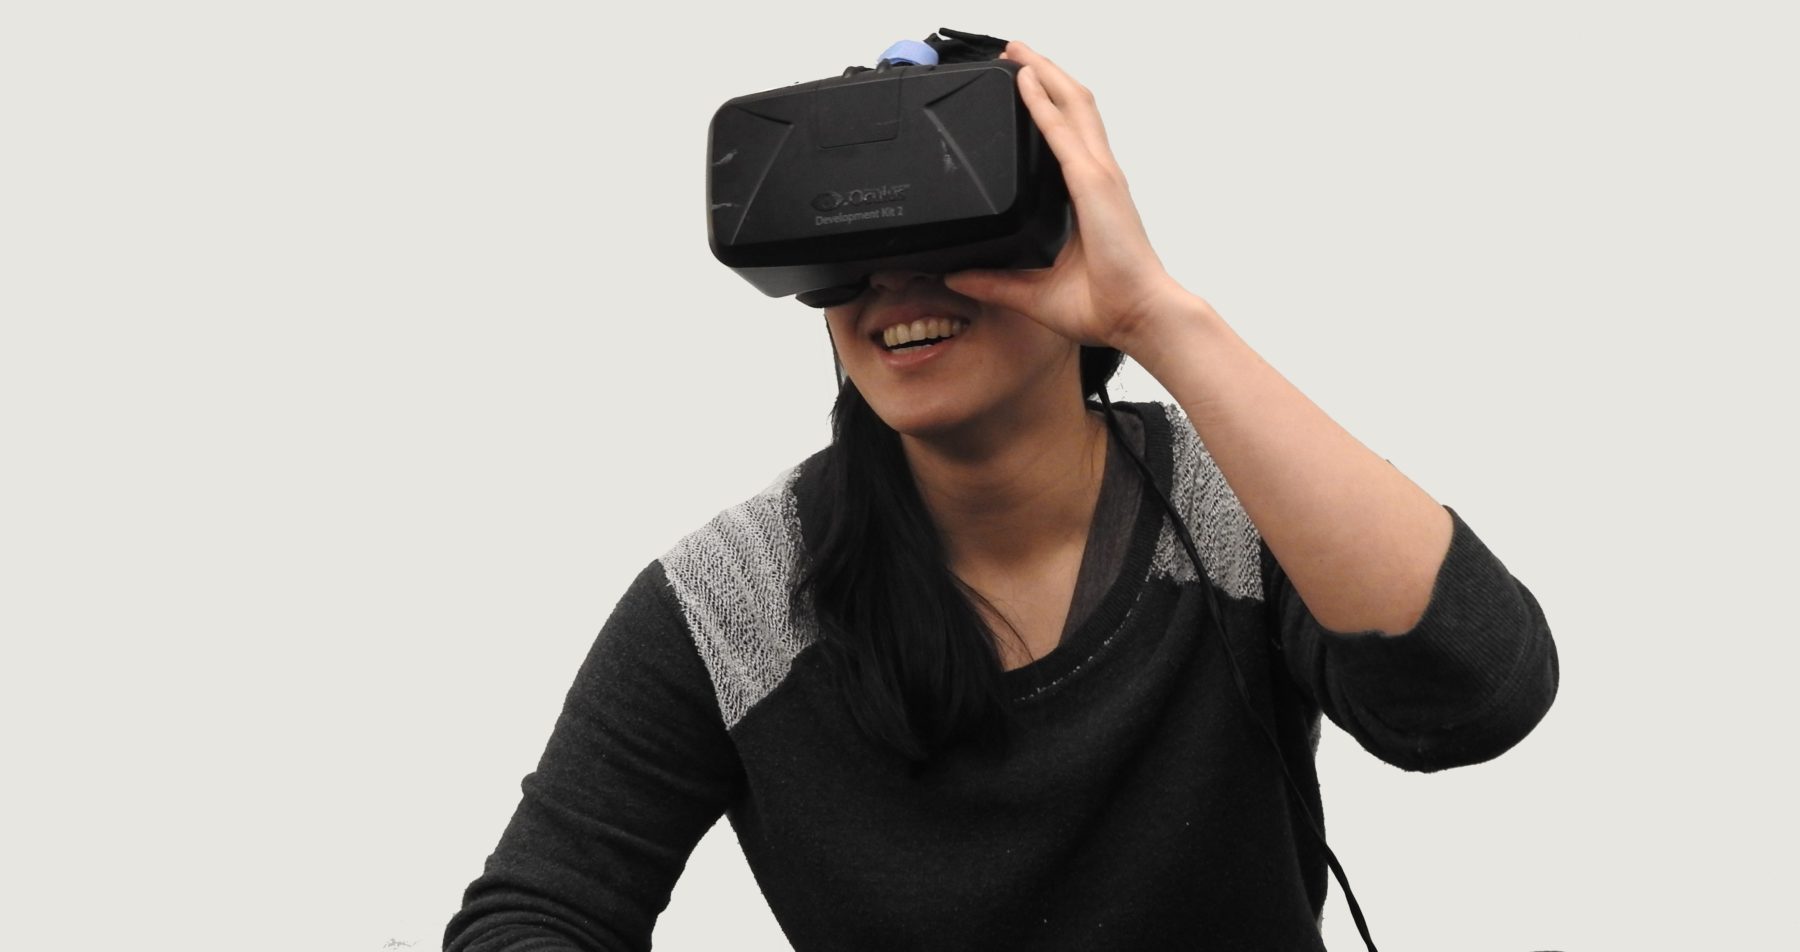 A young woman using a VR head set in a room with white walls.